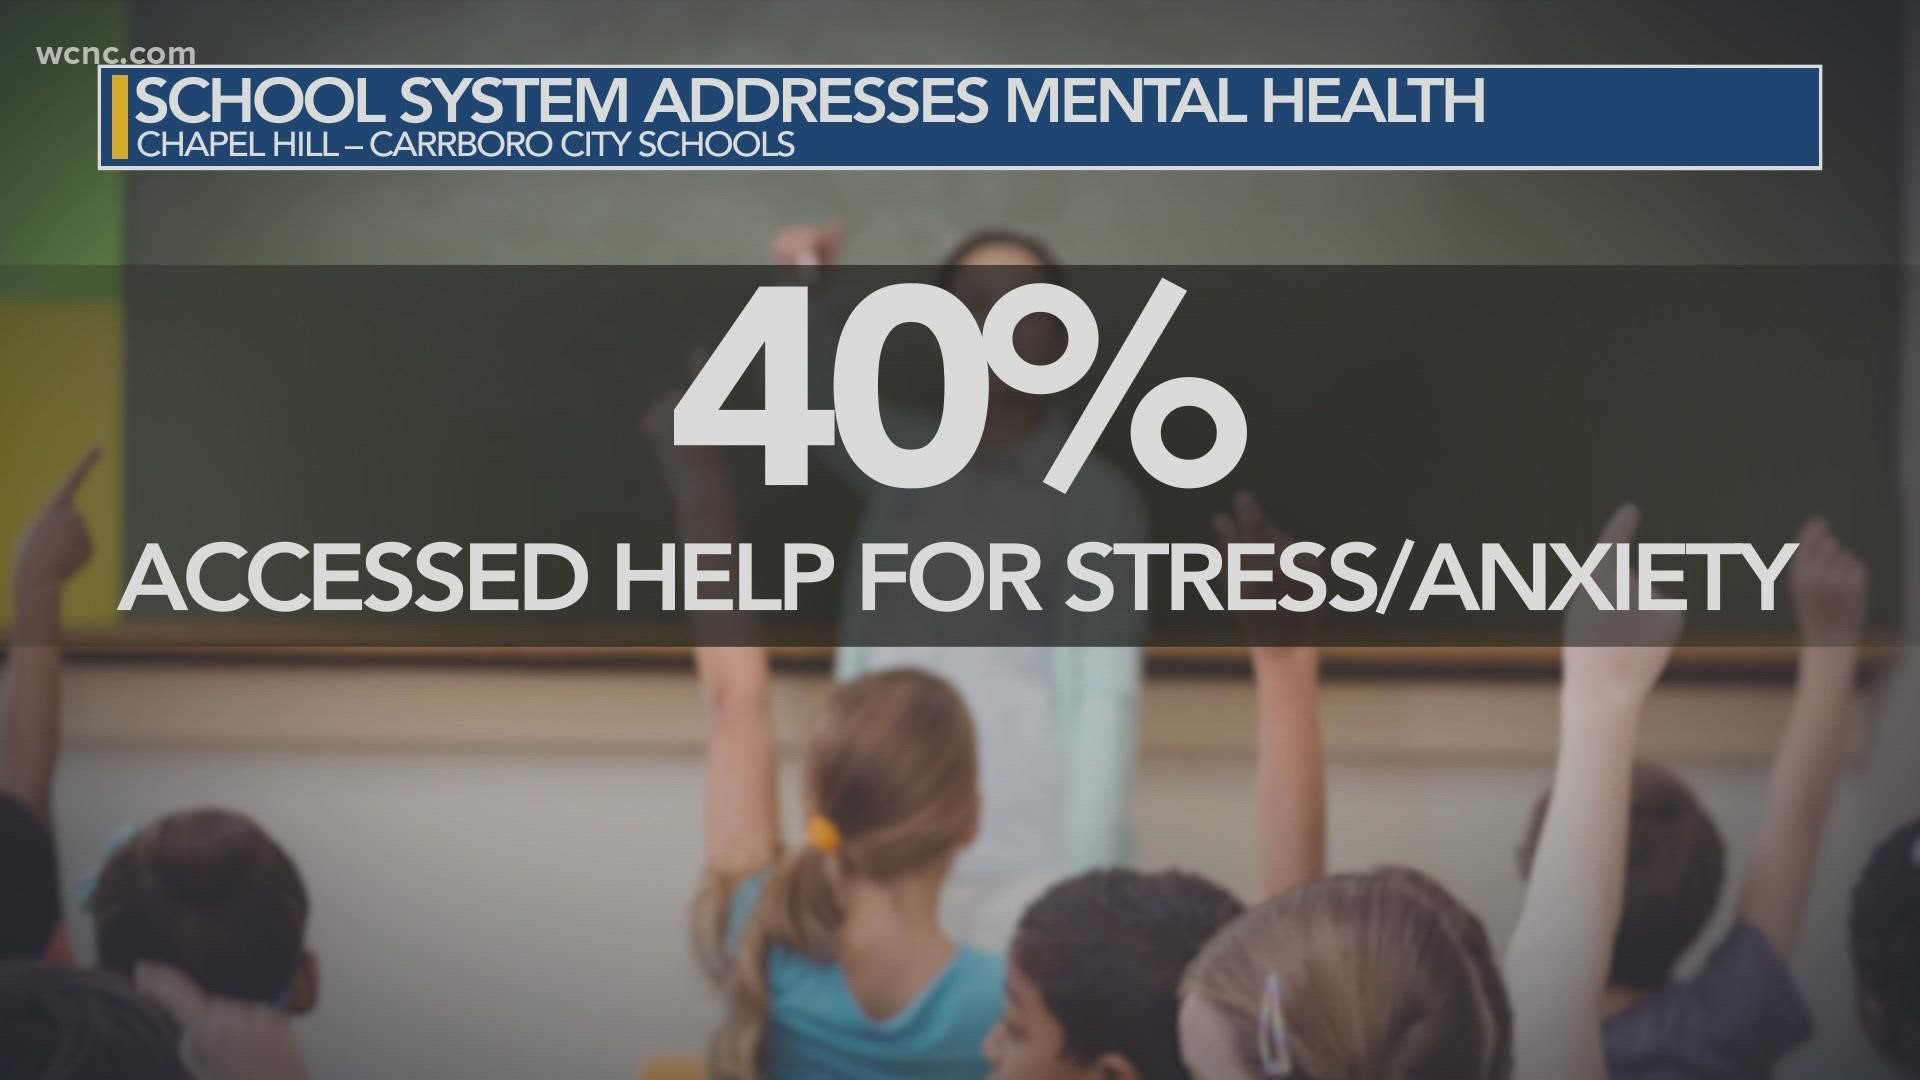 Doctors across the country have declared a national emergency when it comes to kids' mental health.